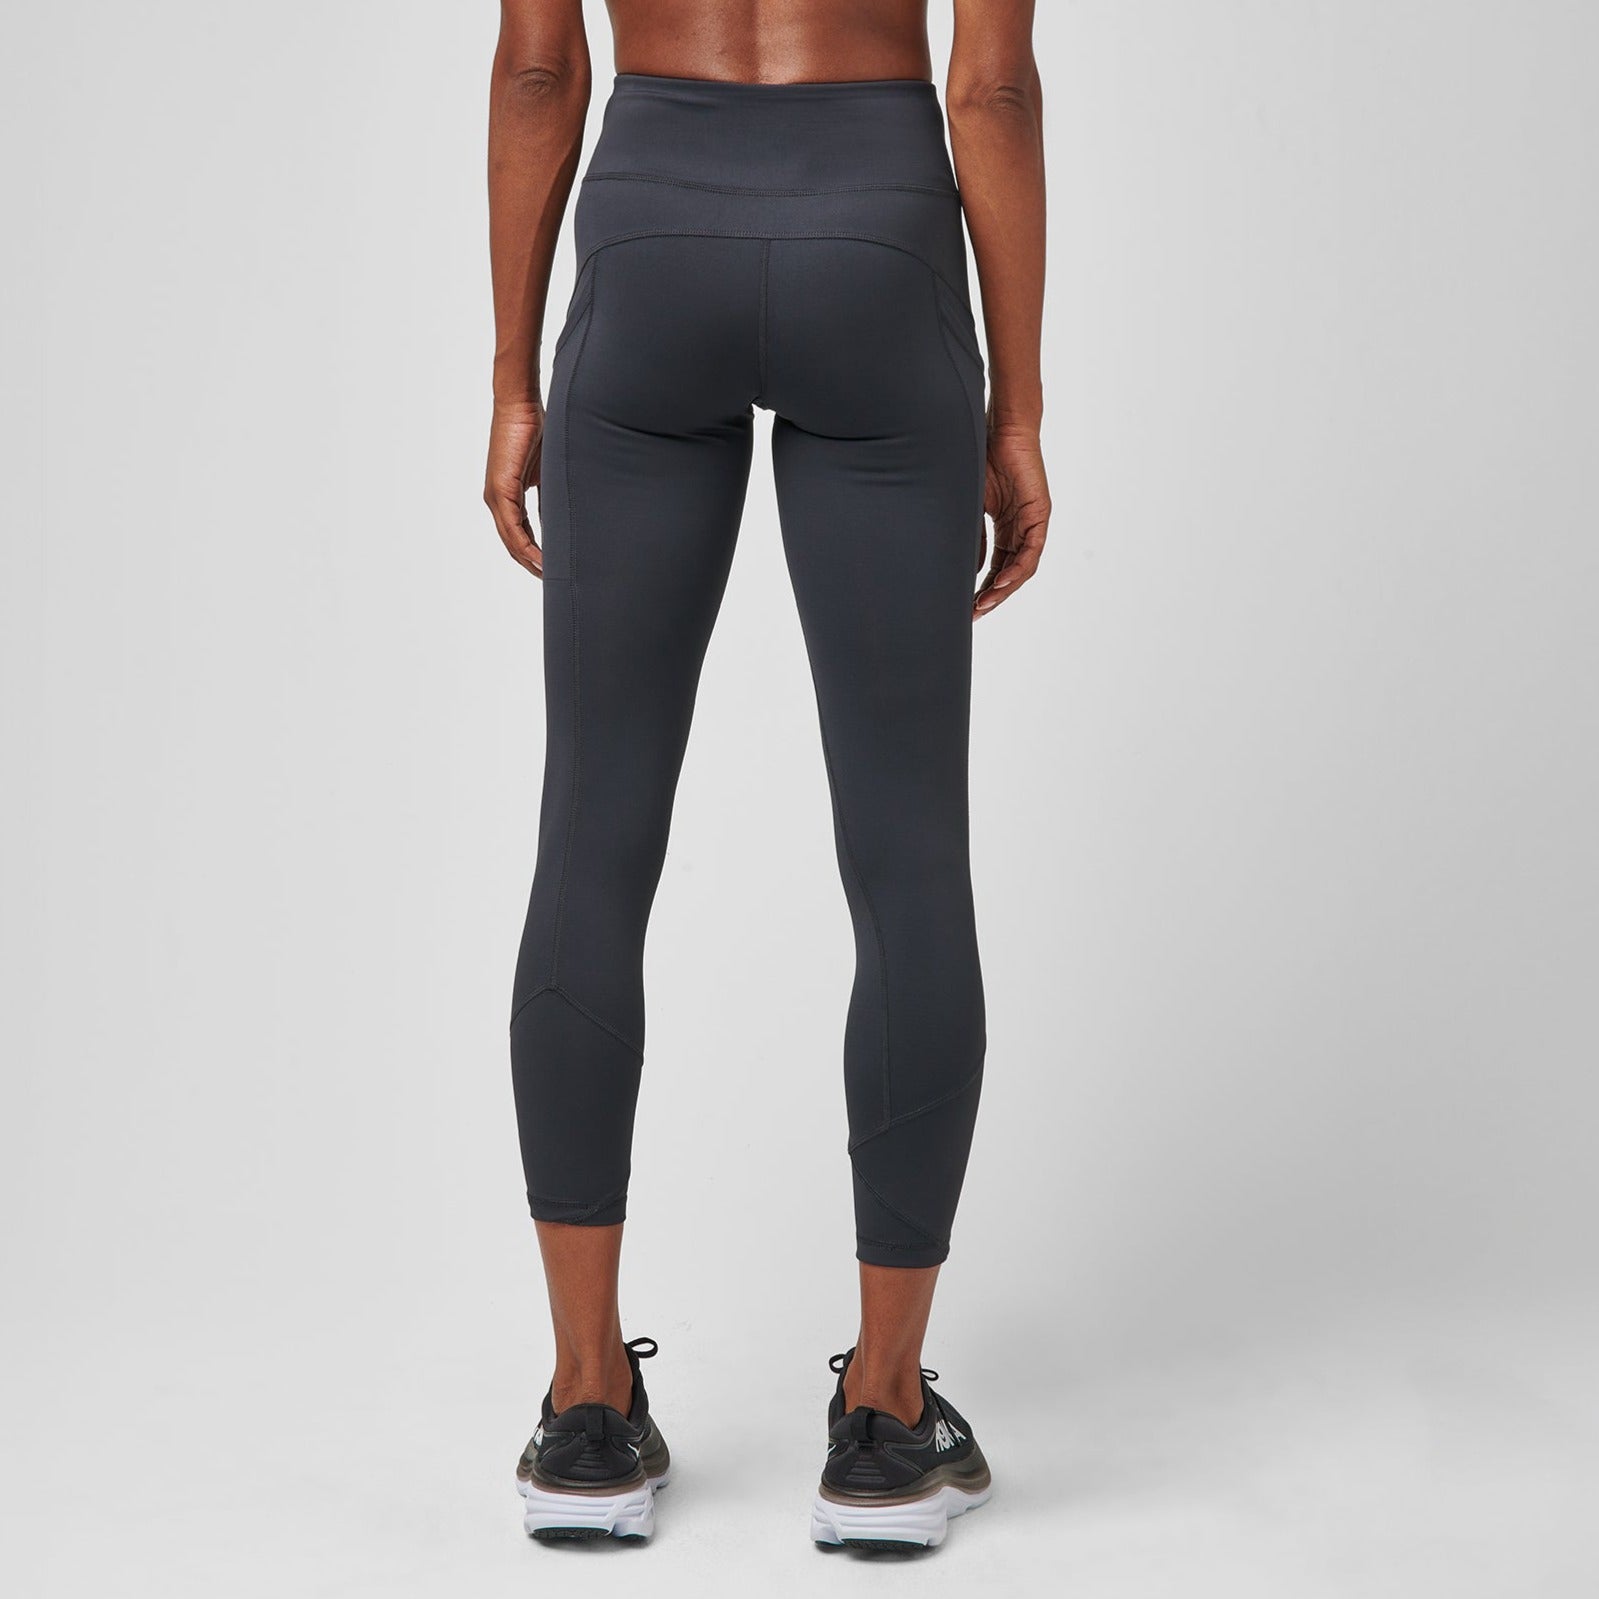 Sports Leggings / Sports Tights − Now: 100+ Items up to −55%